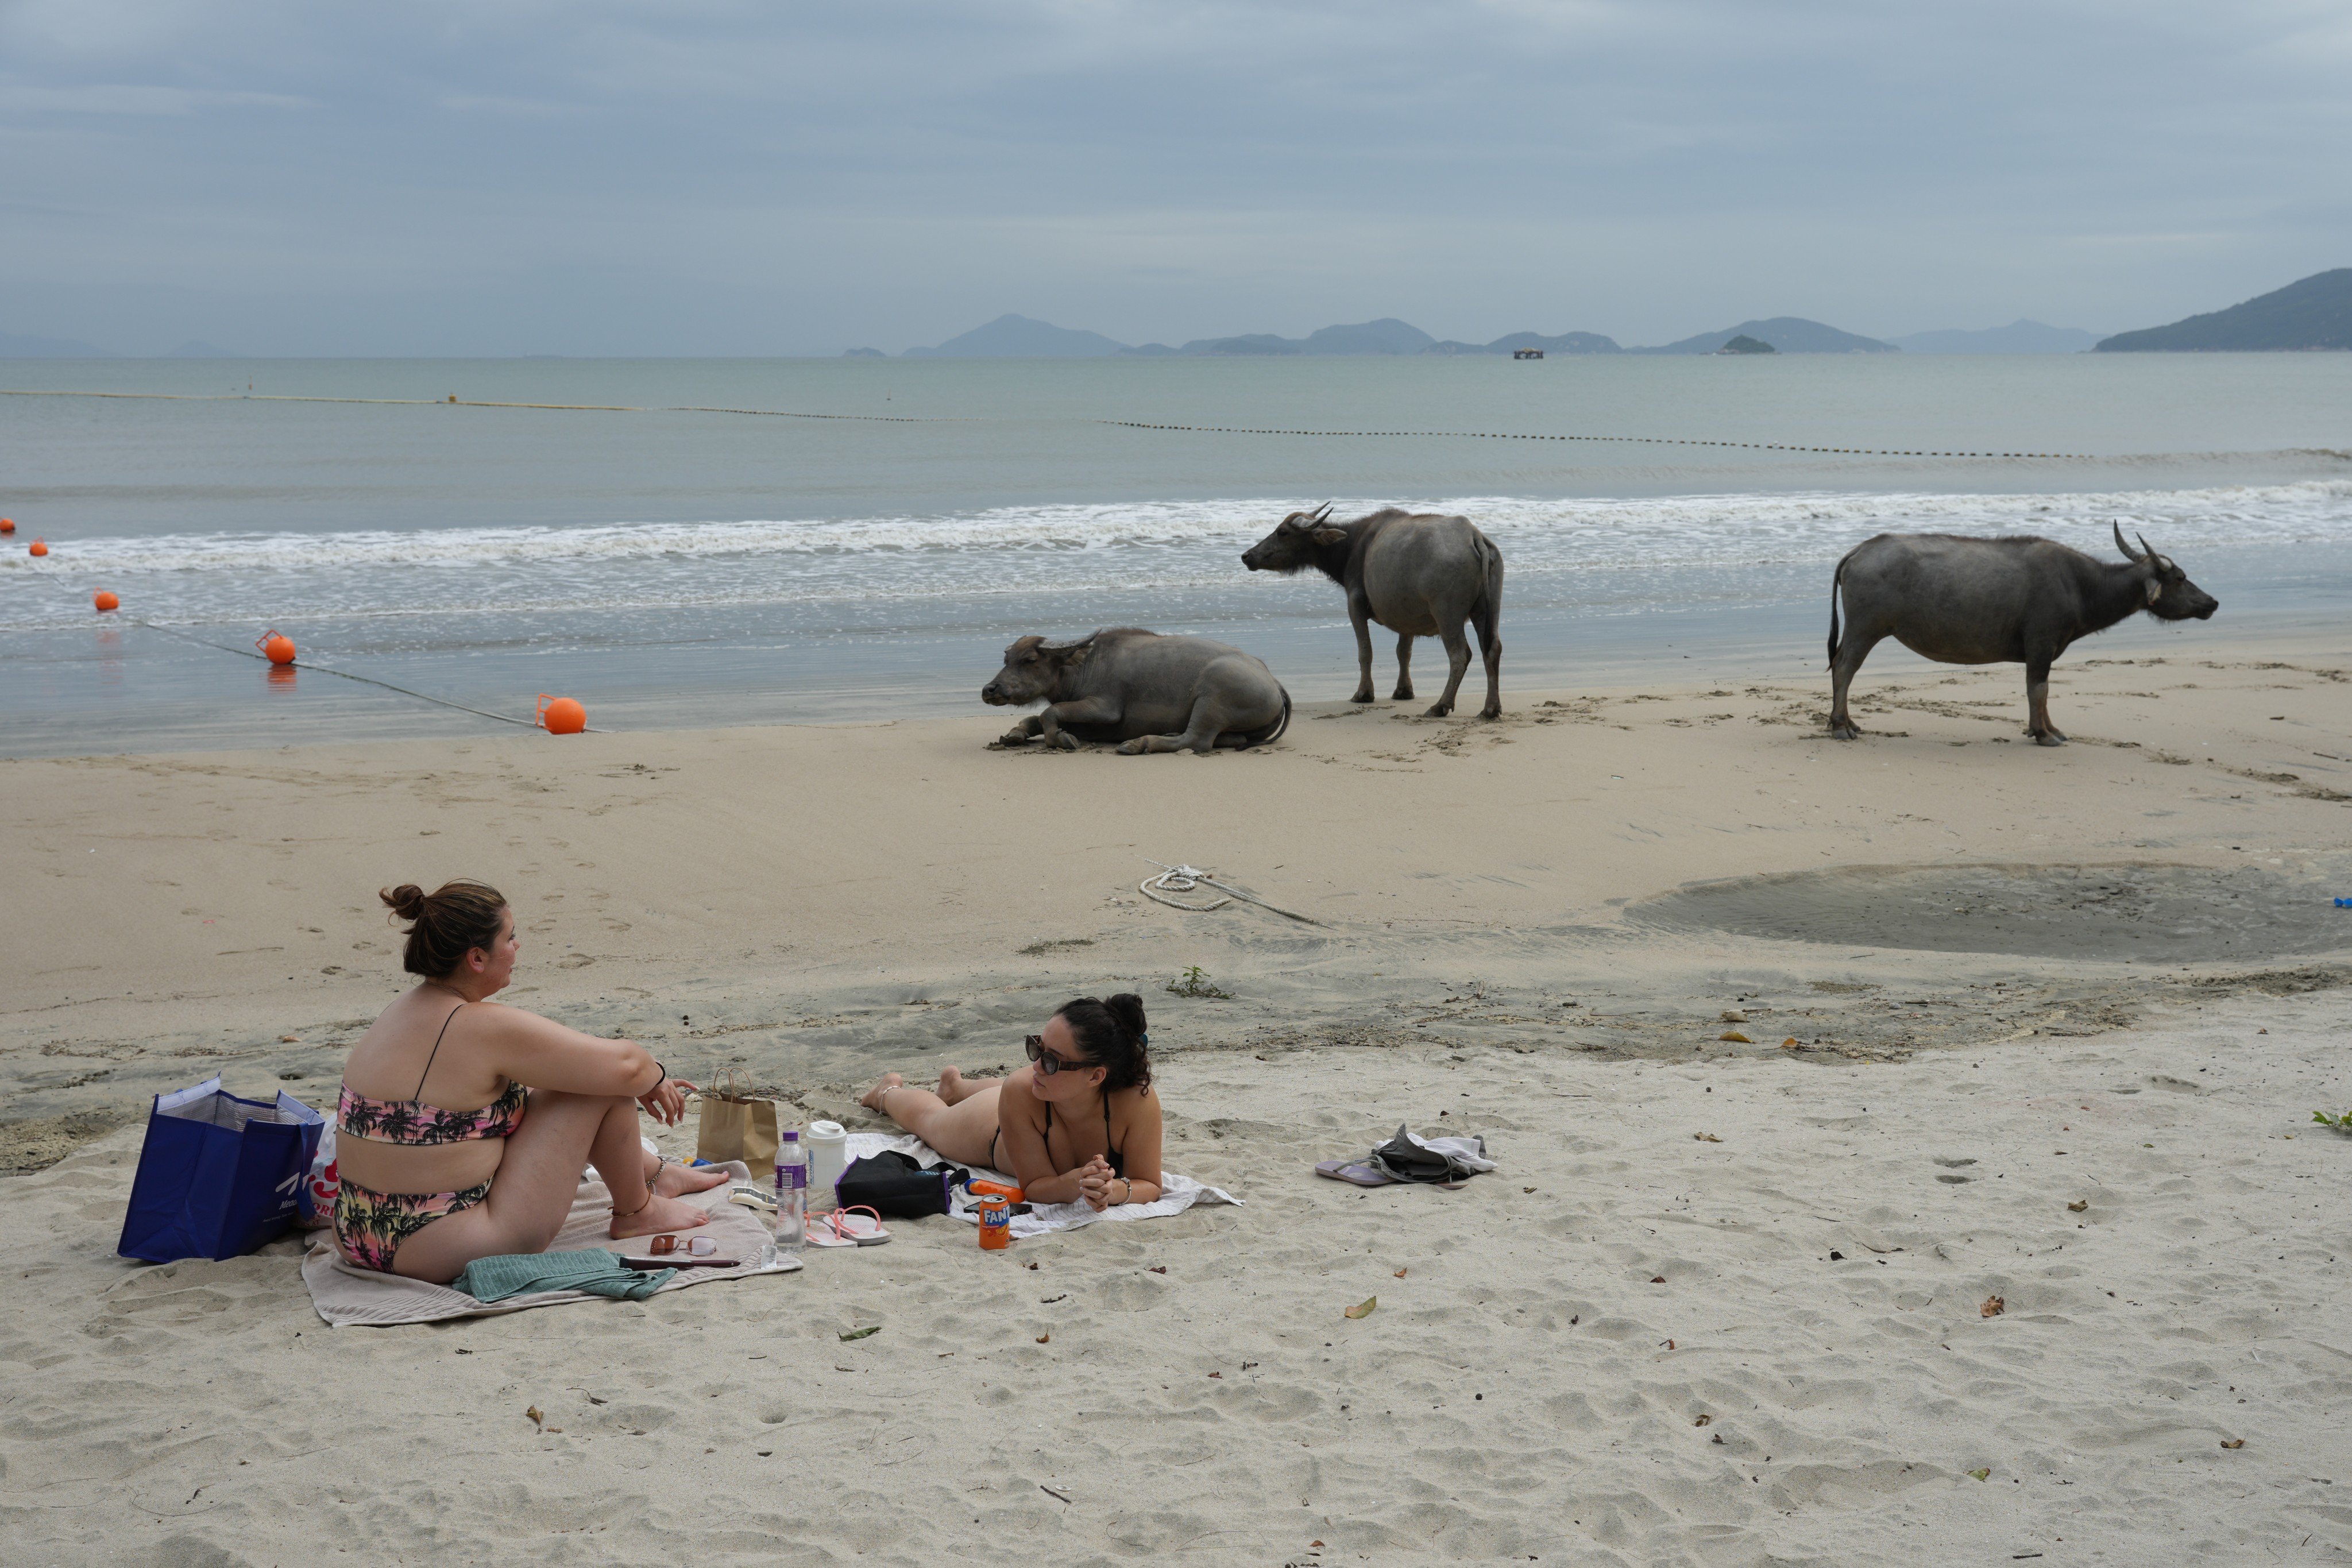 An environmentalist warns that buffaloes’ natural habitat in South Lantau may be affected by an influx of tourists. Photo: Eugene Lee